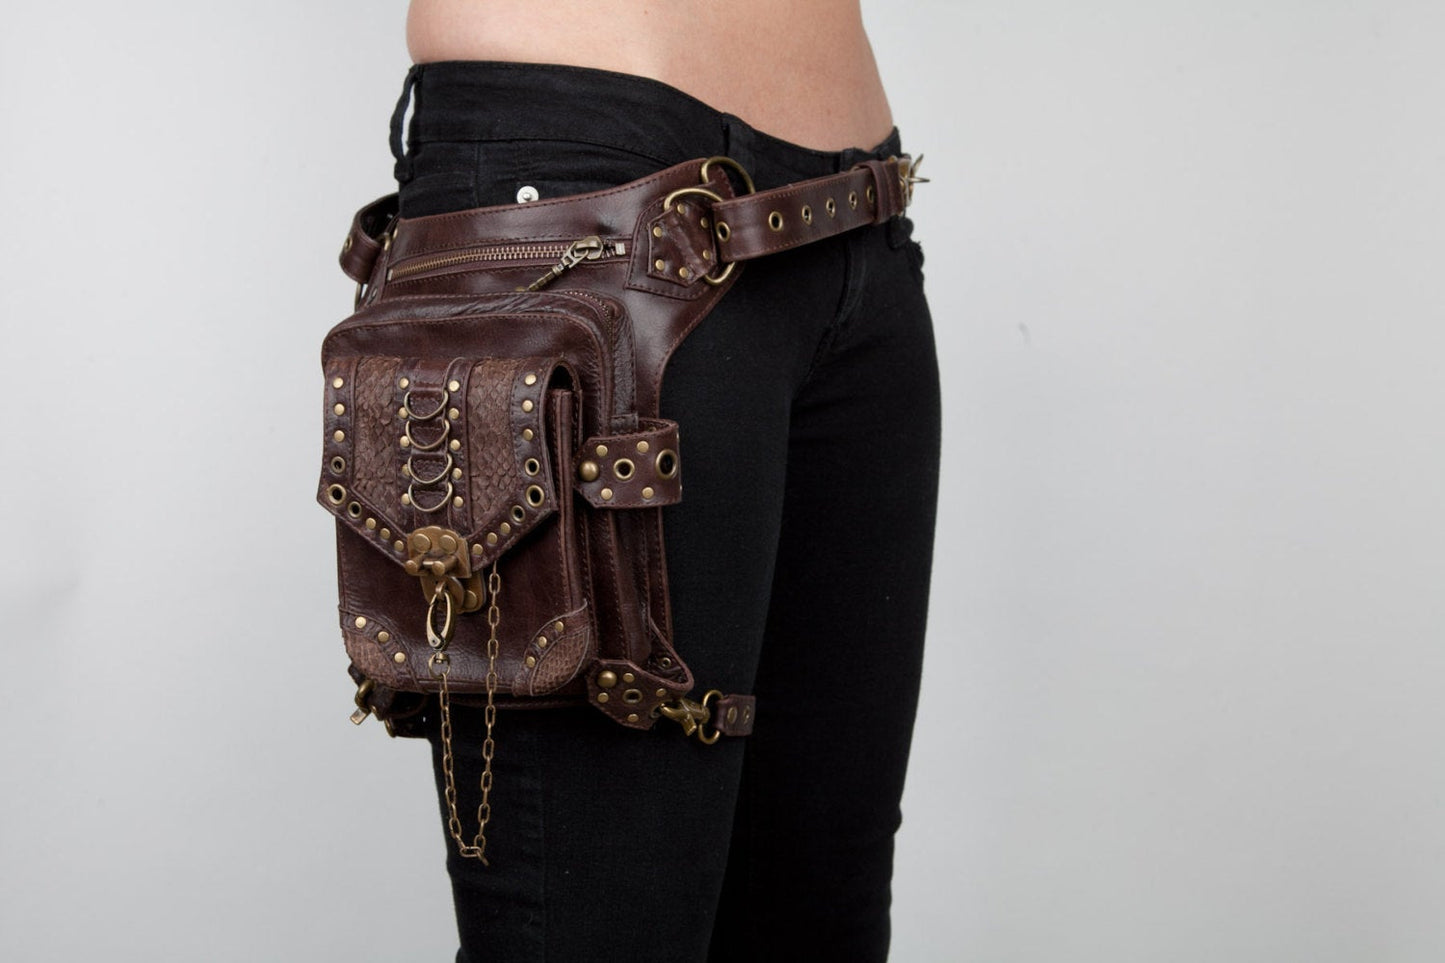 BLASTER 3.0 Brown Leather Convertible Hip Bag